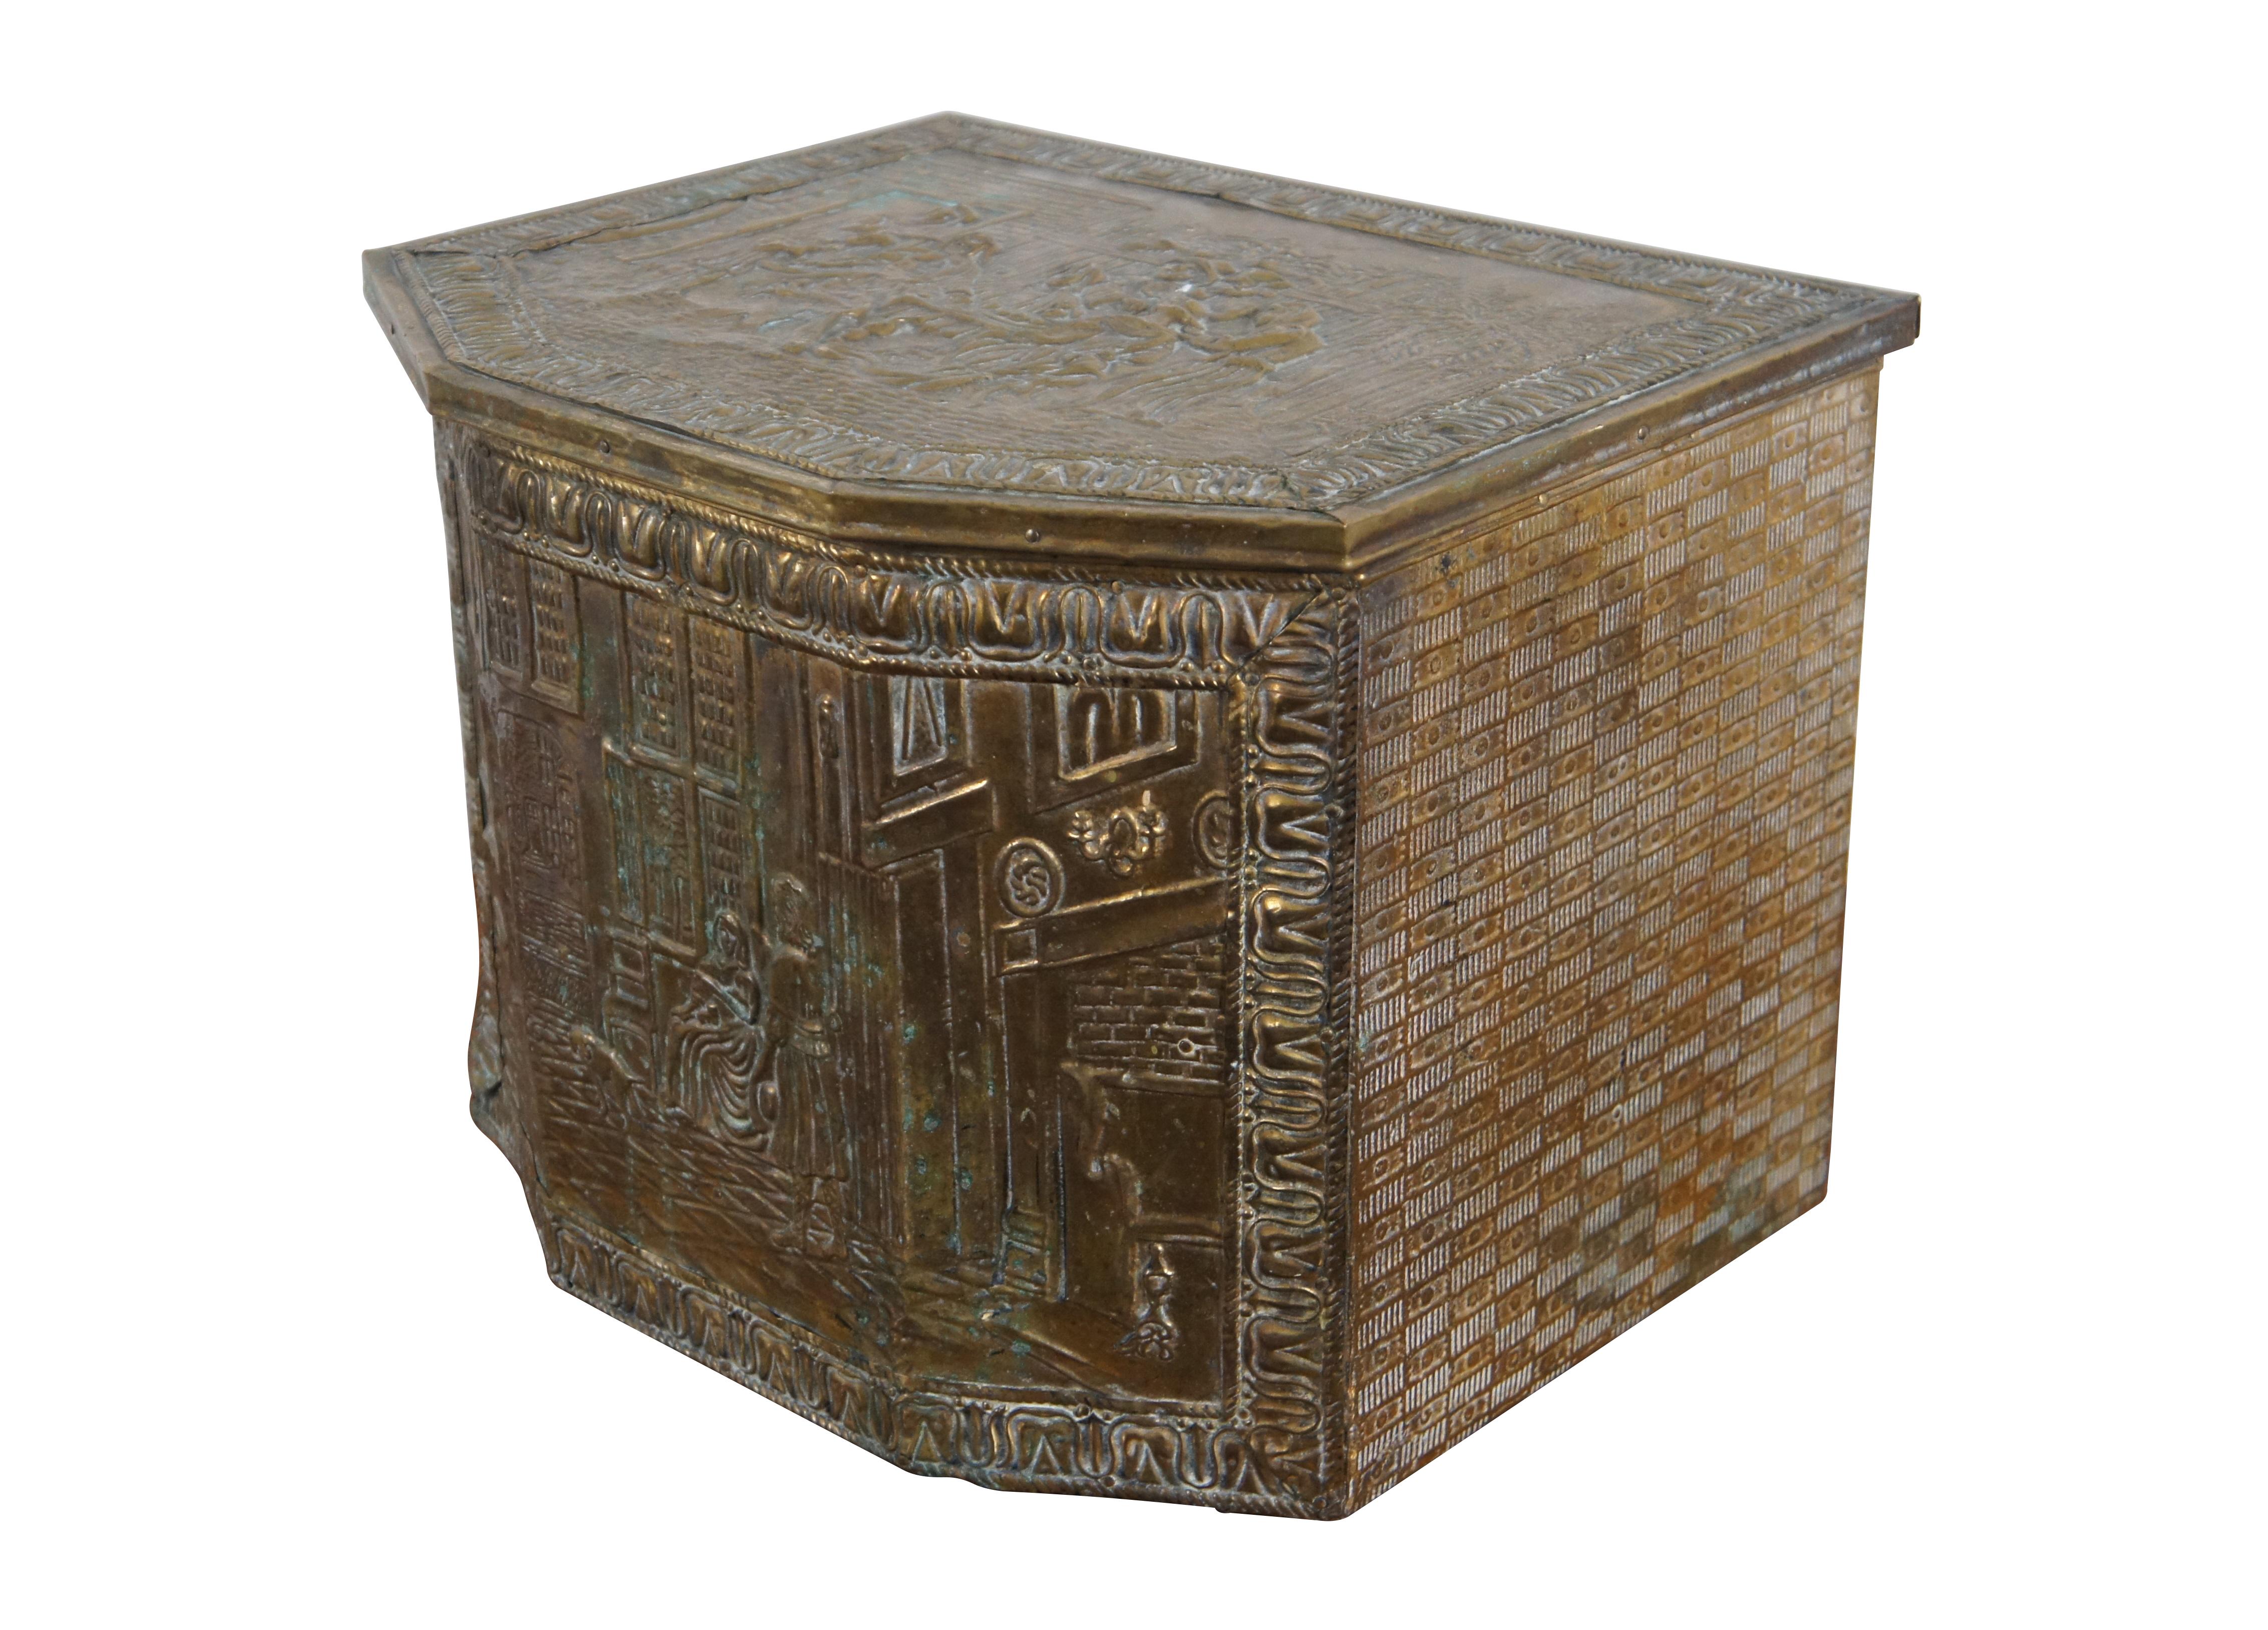 Antique Dutch fireside coal / tinder box / bin / scuttle, made of hardwood and clad in brass, embossed with a textured checkered motif on the sides and manor scene on the front and a tavern scene on the lid, framed in a border of tulips. Includes